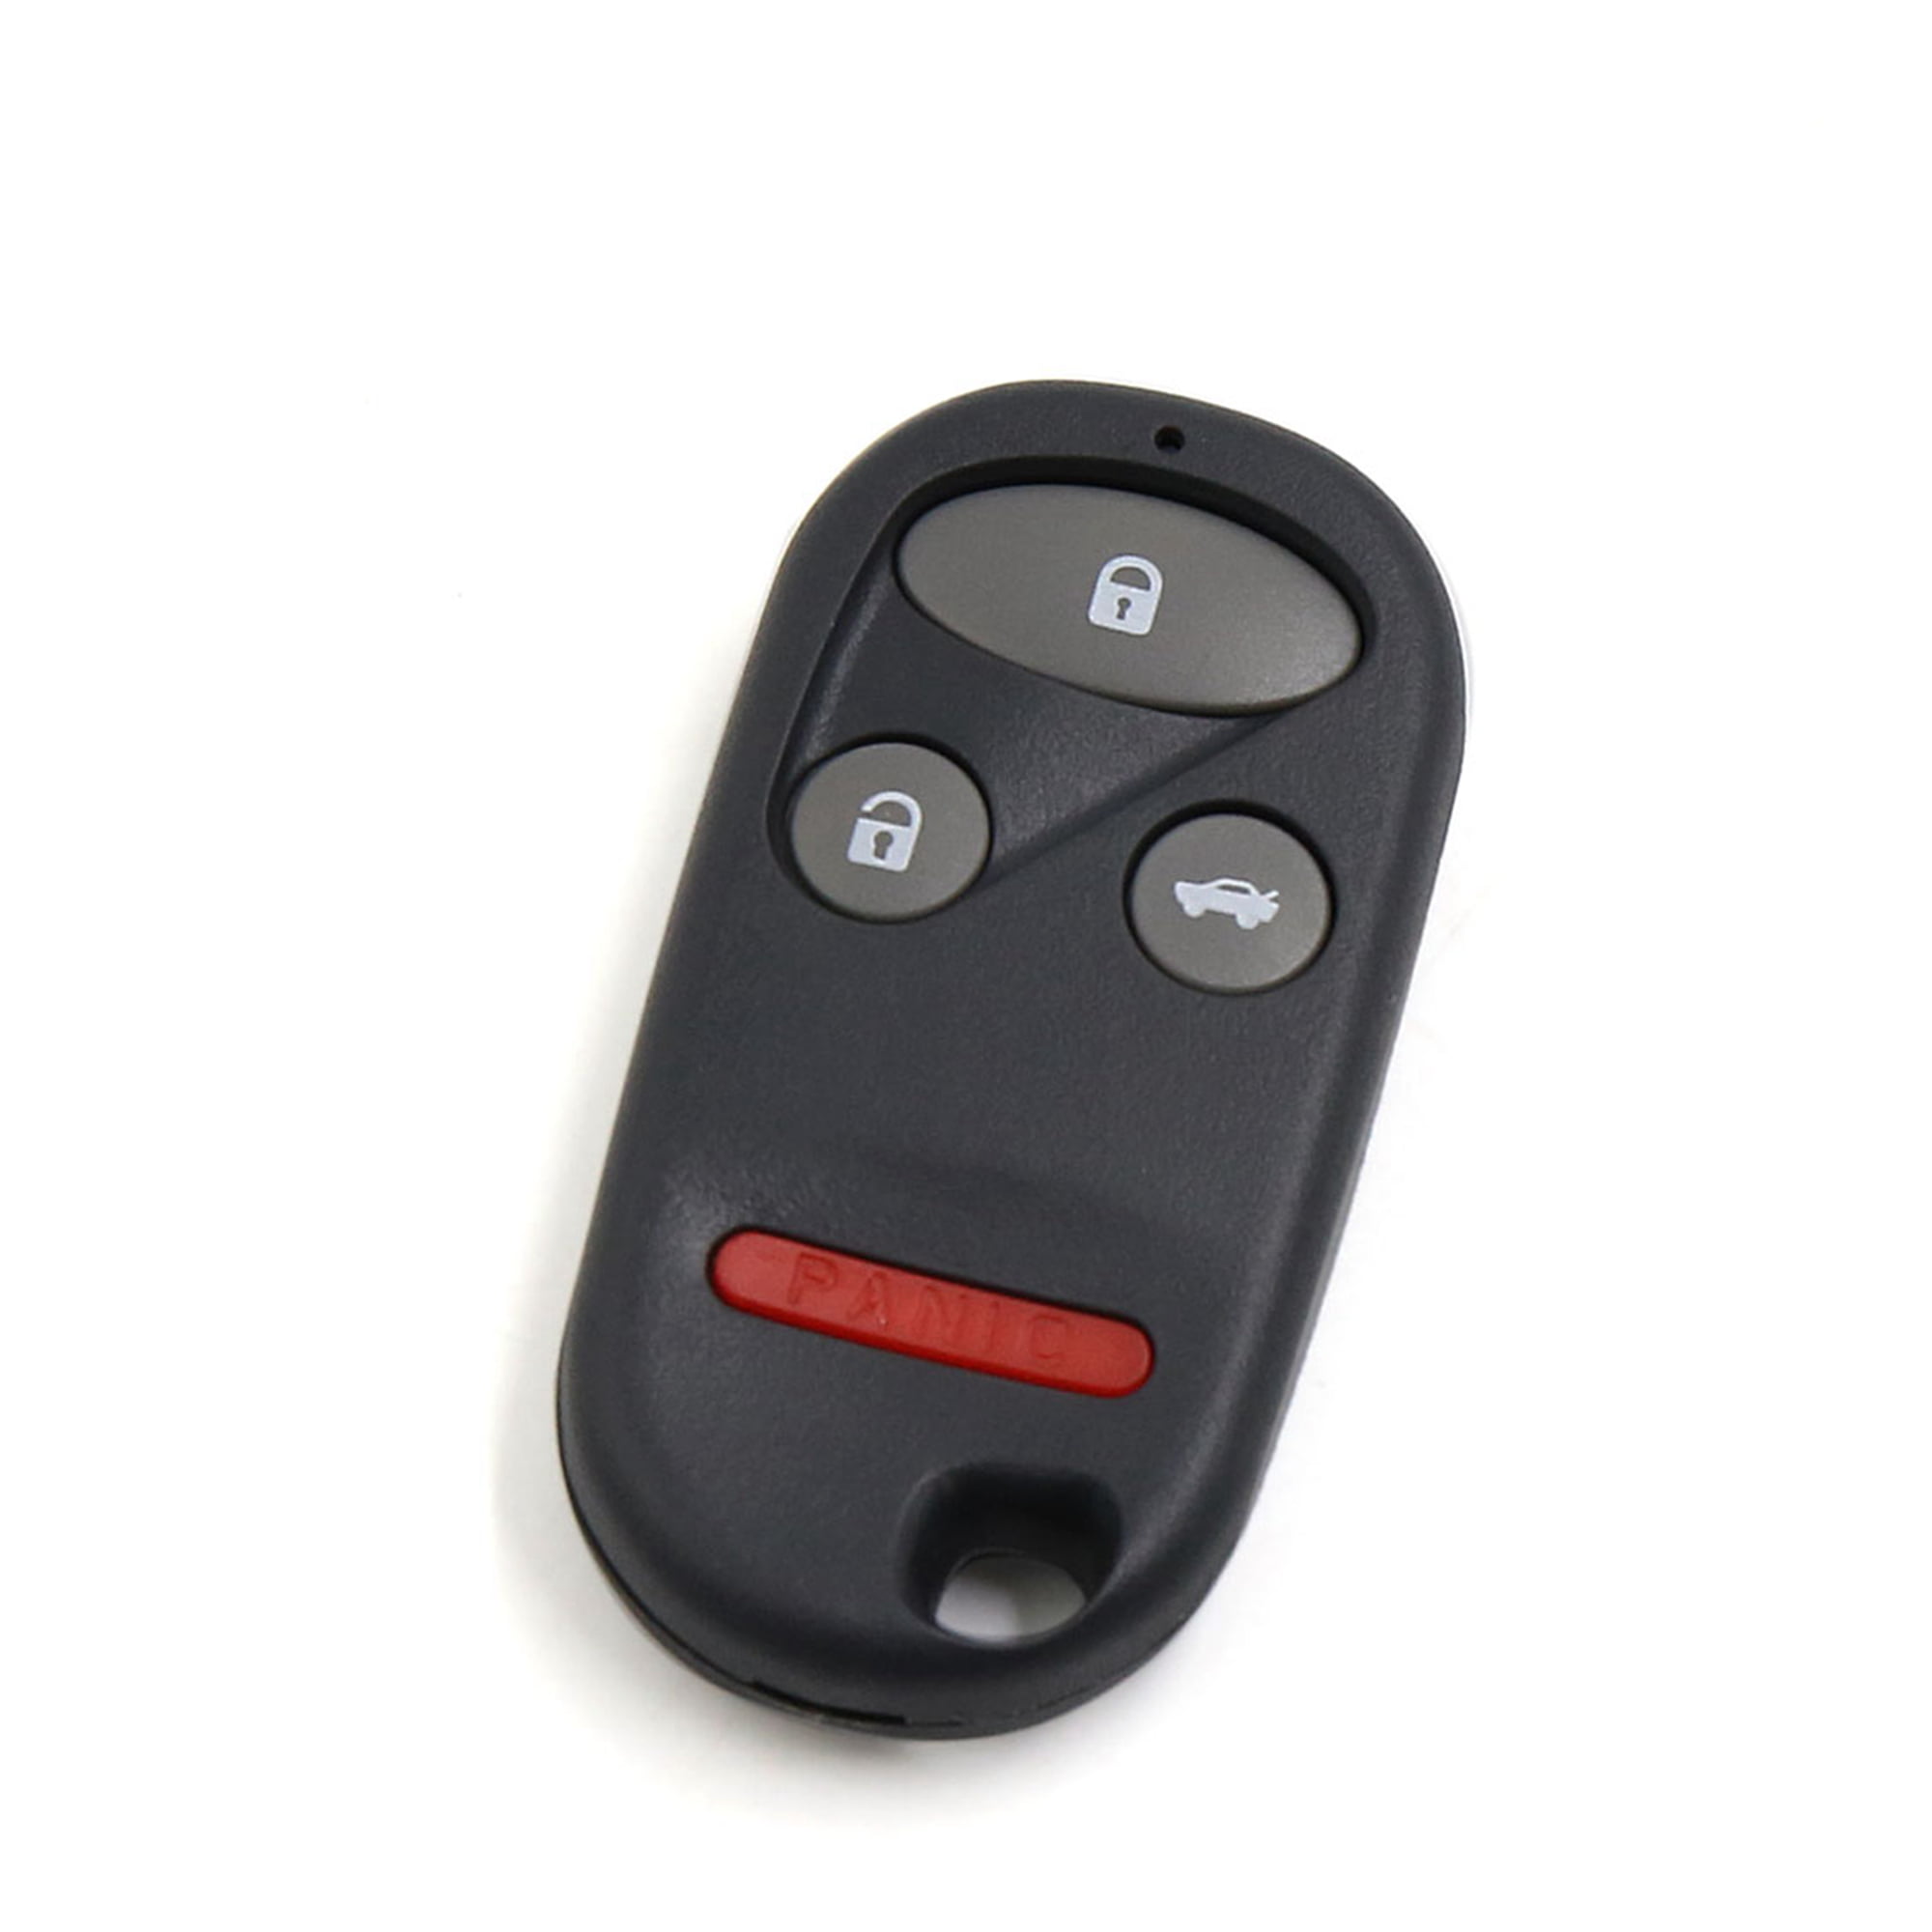 New Replacement Keyless Entry Remote Control Key Fob Clicker for KOBUTAH2T 